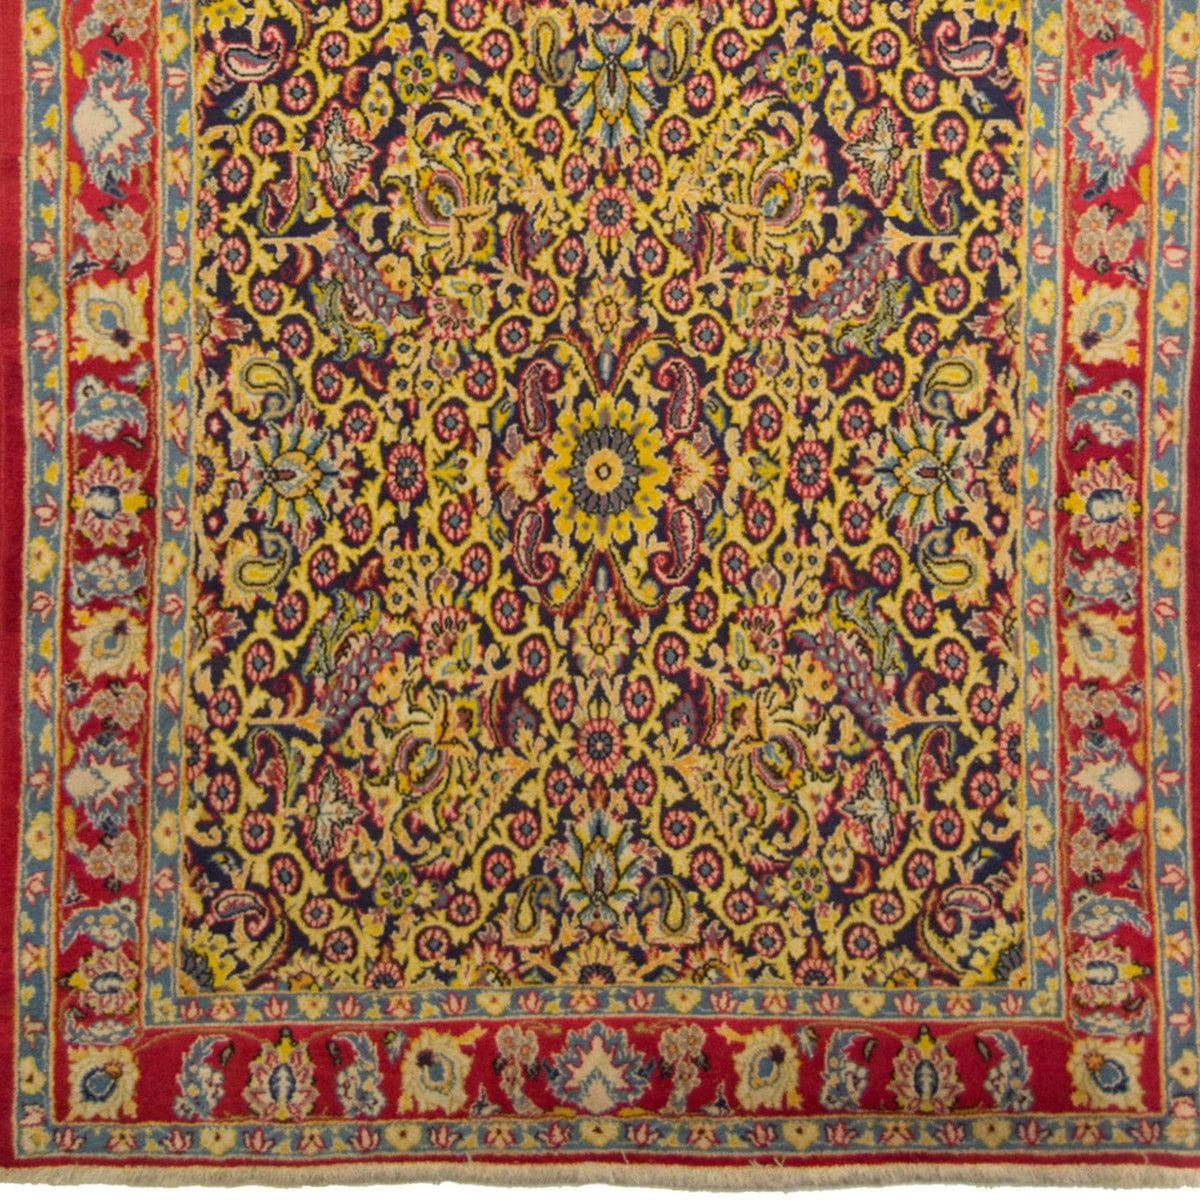 Authentic Hand-knotted Wool Persian Viss Rug 154cm x 305cm